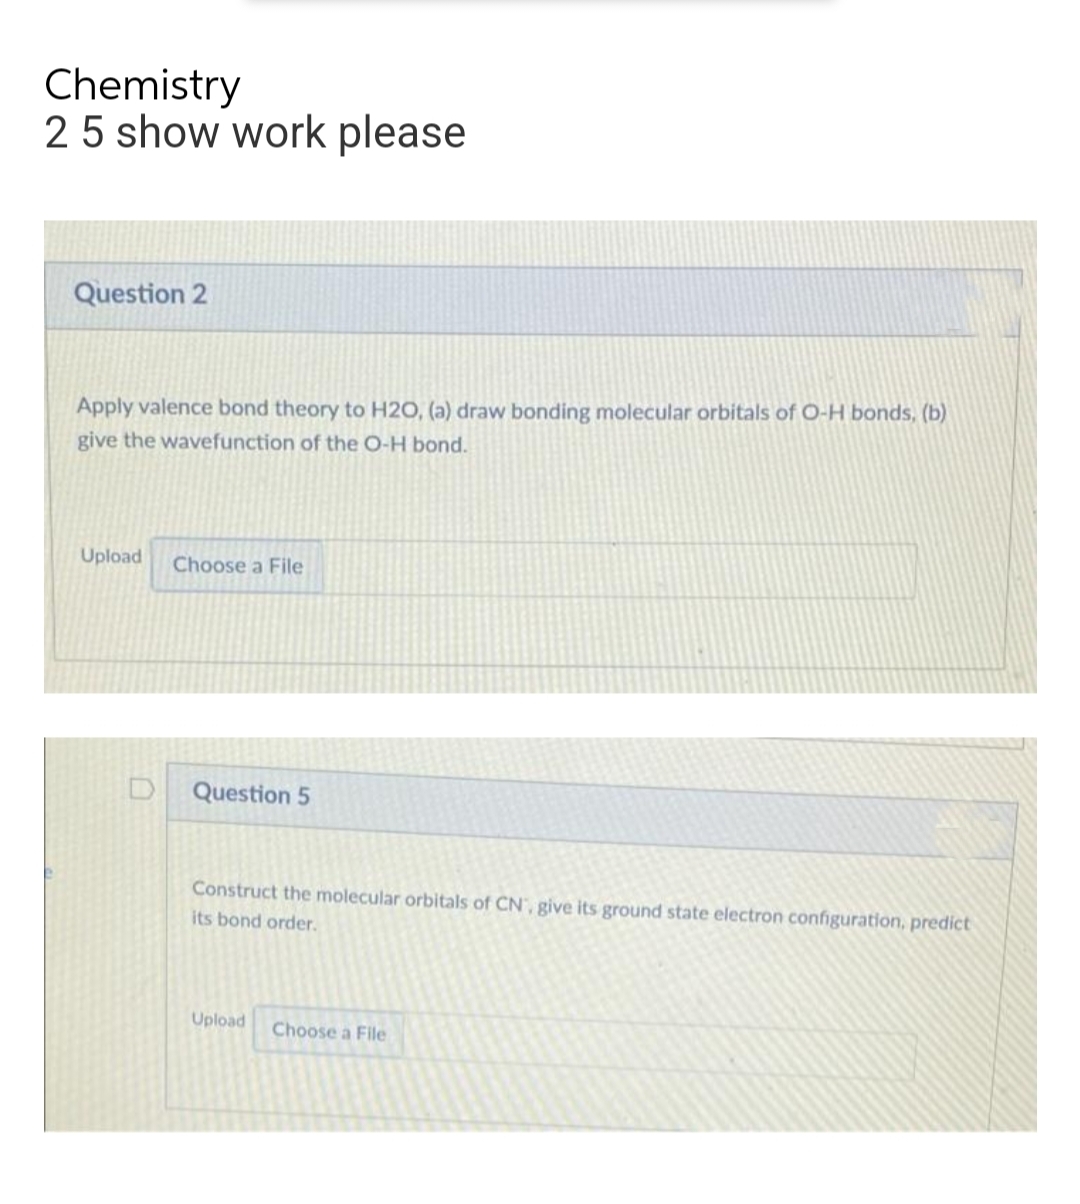 Chemistry
2 5 show work please
Question 2
Apply valence bond theory to H2O, (a) draw bonding molecular orbitals of O-H bonds, (b)
give the wavefunction of the O-H bond.
Upload
Choose a File
Question 5
Construct the molecular orbitals of CN, give its ground state electron configuration, predict
its bond order.
Upload
Choose a File